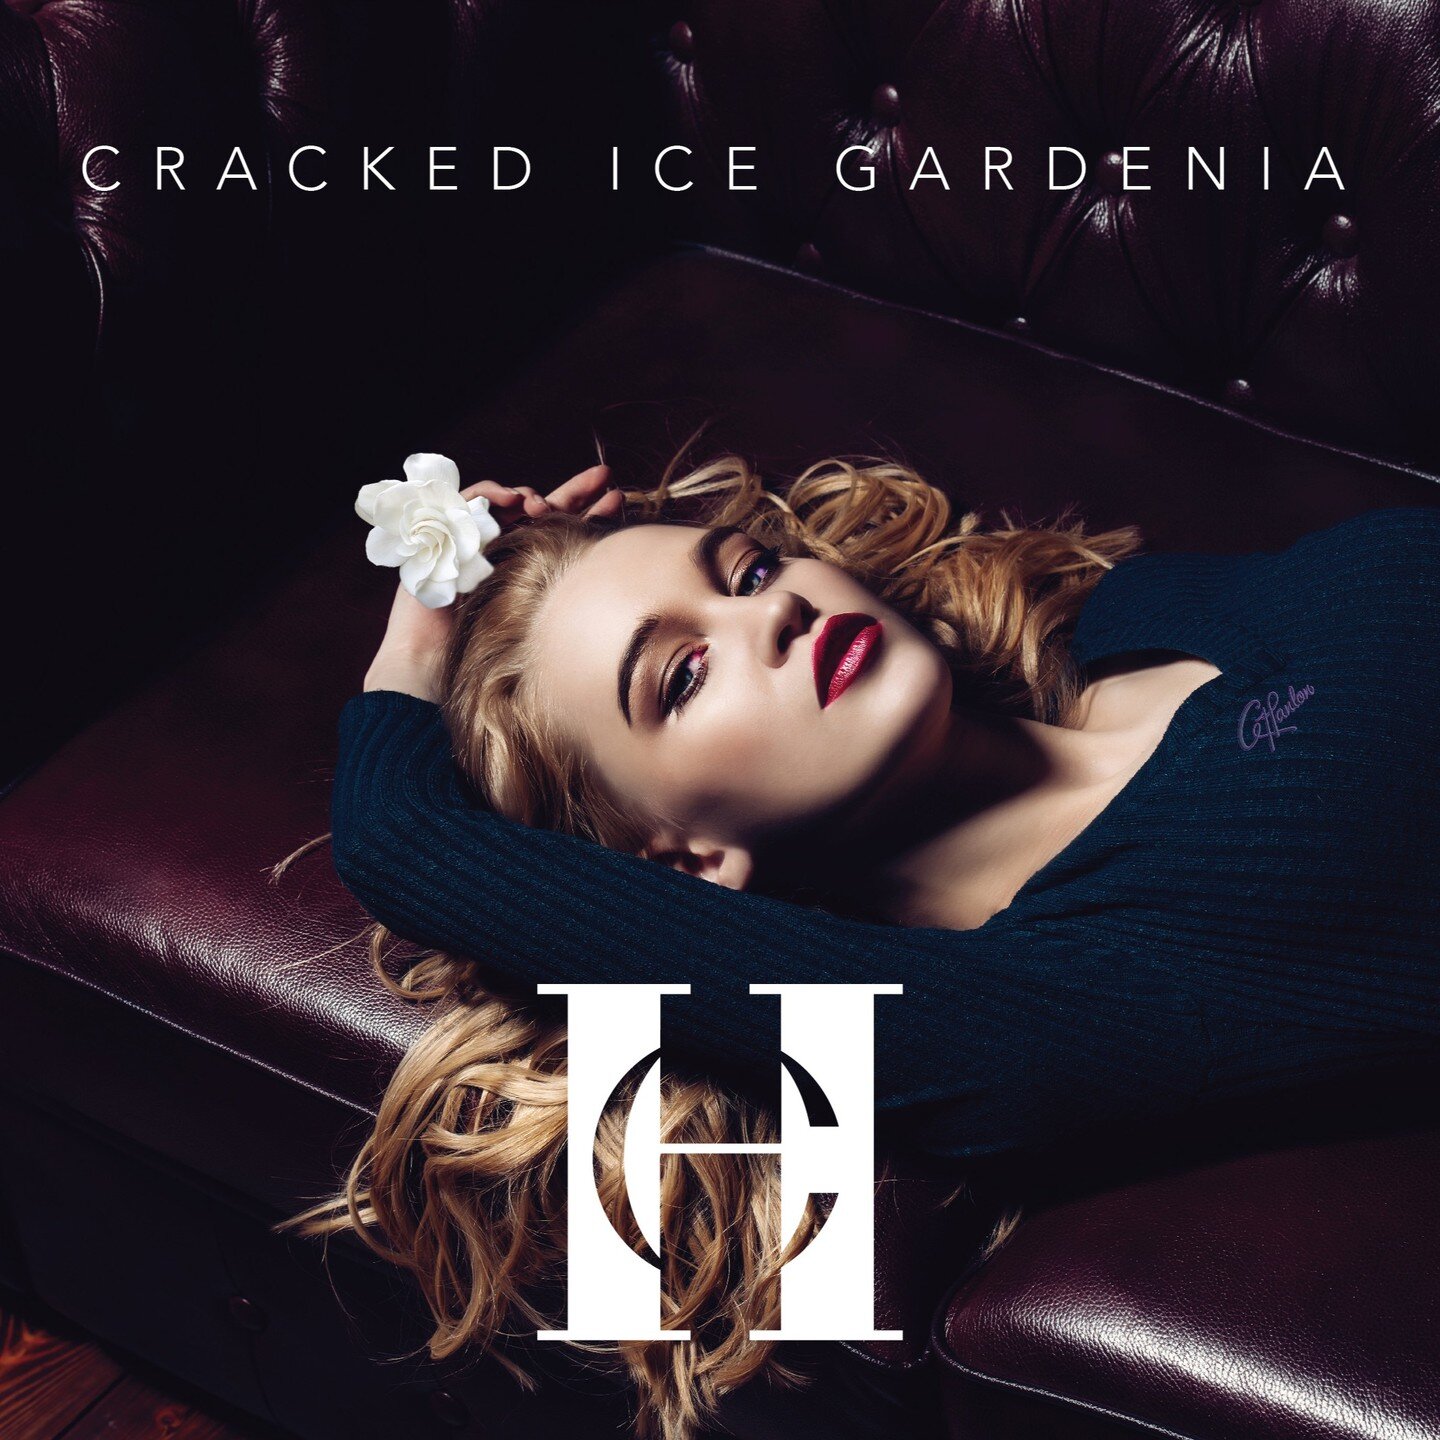 New. CRACKED ICE GARDENIA. The Perfume.
By Australia's FIRST Perfumer&reg;
EST1875 | www.christopherhanlon.com
The New Must-Have Fragrance by CHRISTOPHER HANLON&reg;. Cracked Ice Gardenia is possibly Christopher Hanlon&rsquo;s&reg; most ambitious cre